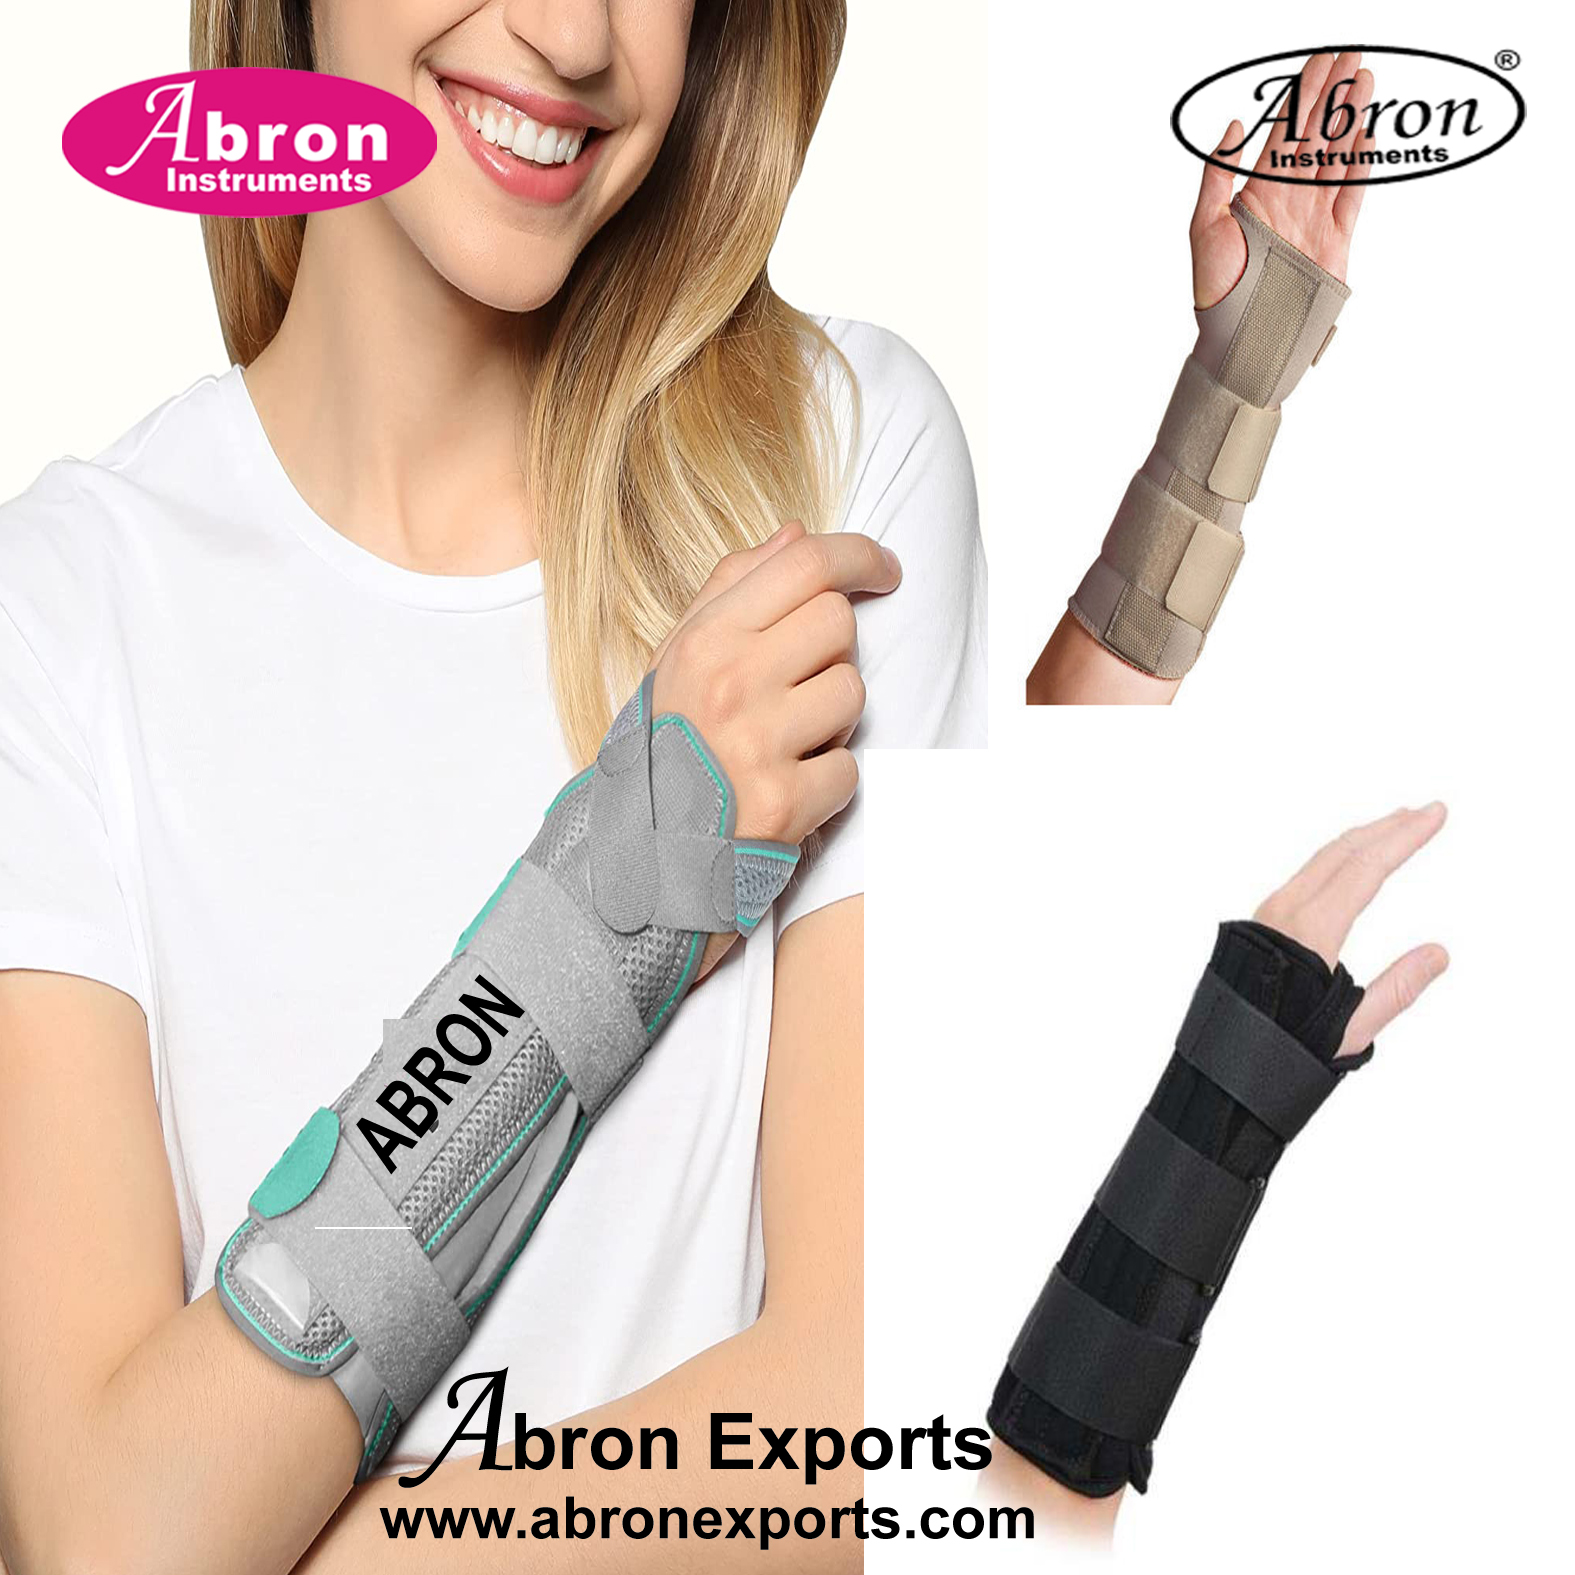 Bandage Splint Forarm bandage Grey Universal Size1 for Hairline fracture Surgical Nursing Home Clinic Ortho Abron ABM-1723A 